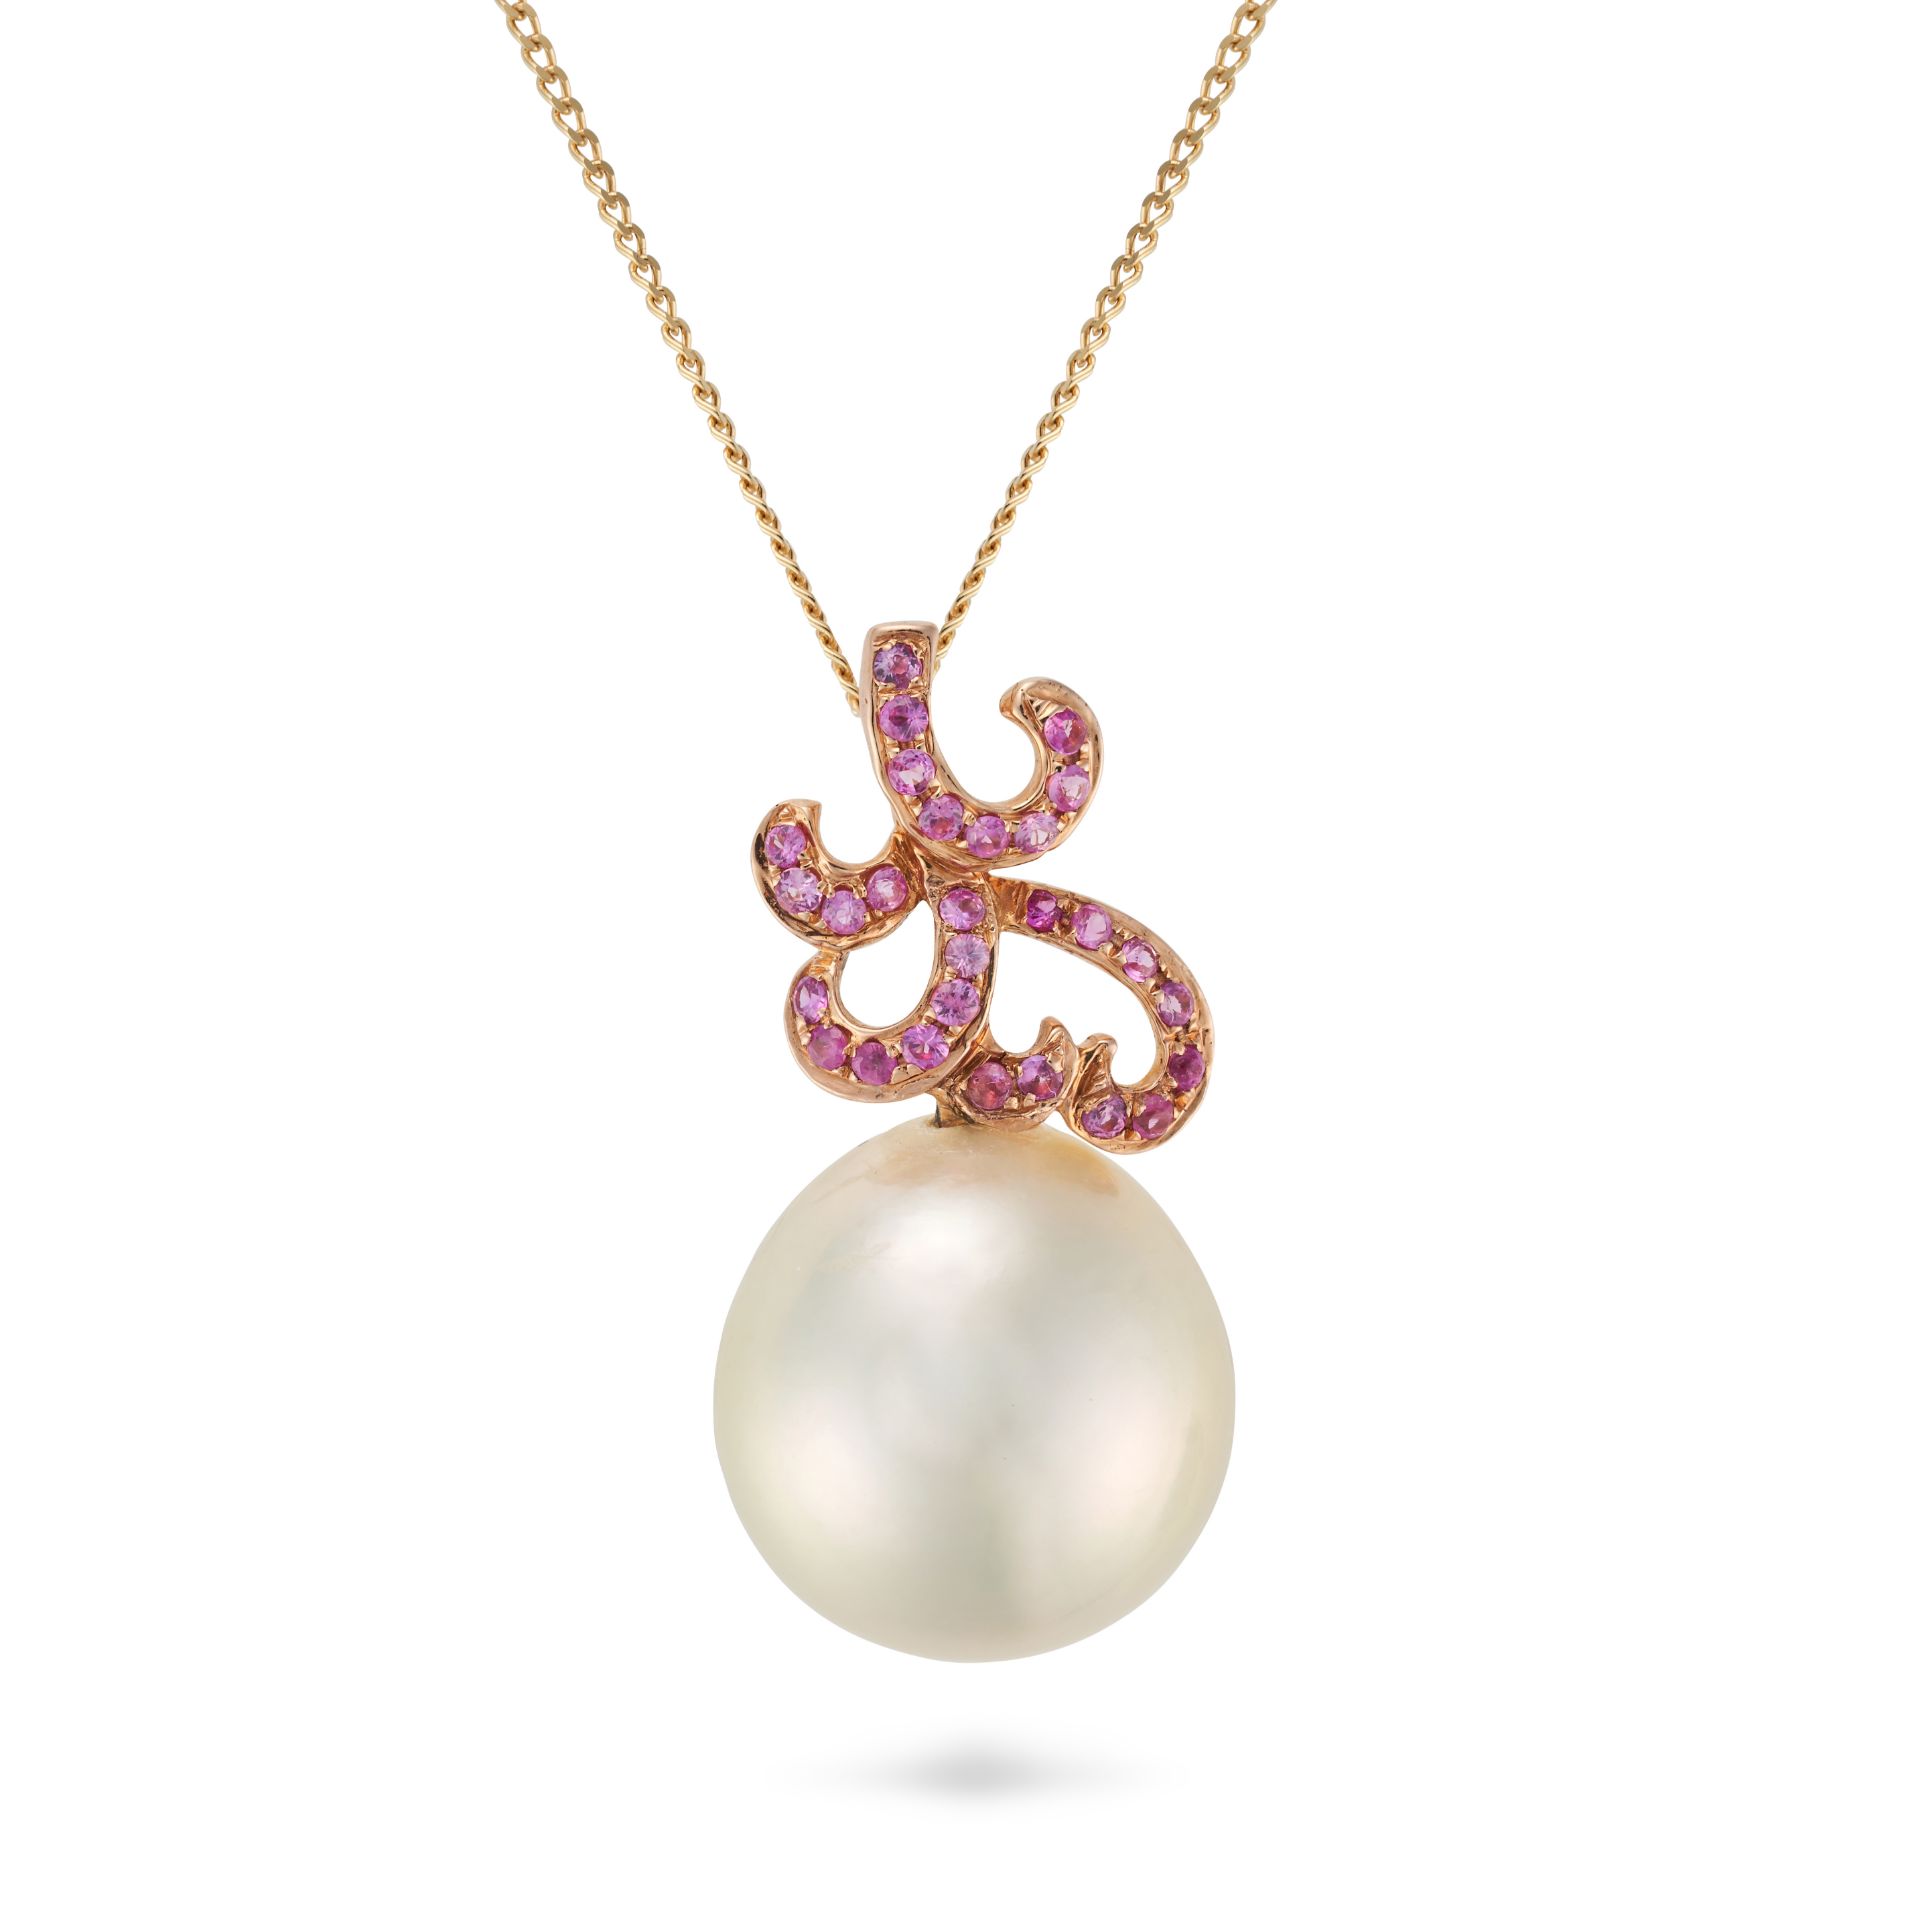 A PEARL AND PINK SAPPHIRE PENDANT NECKLACE the pendant comprising a scrolling motif set with roun...